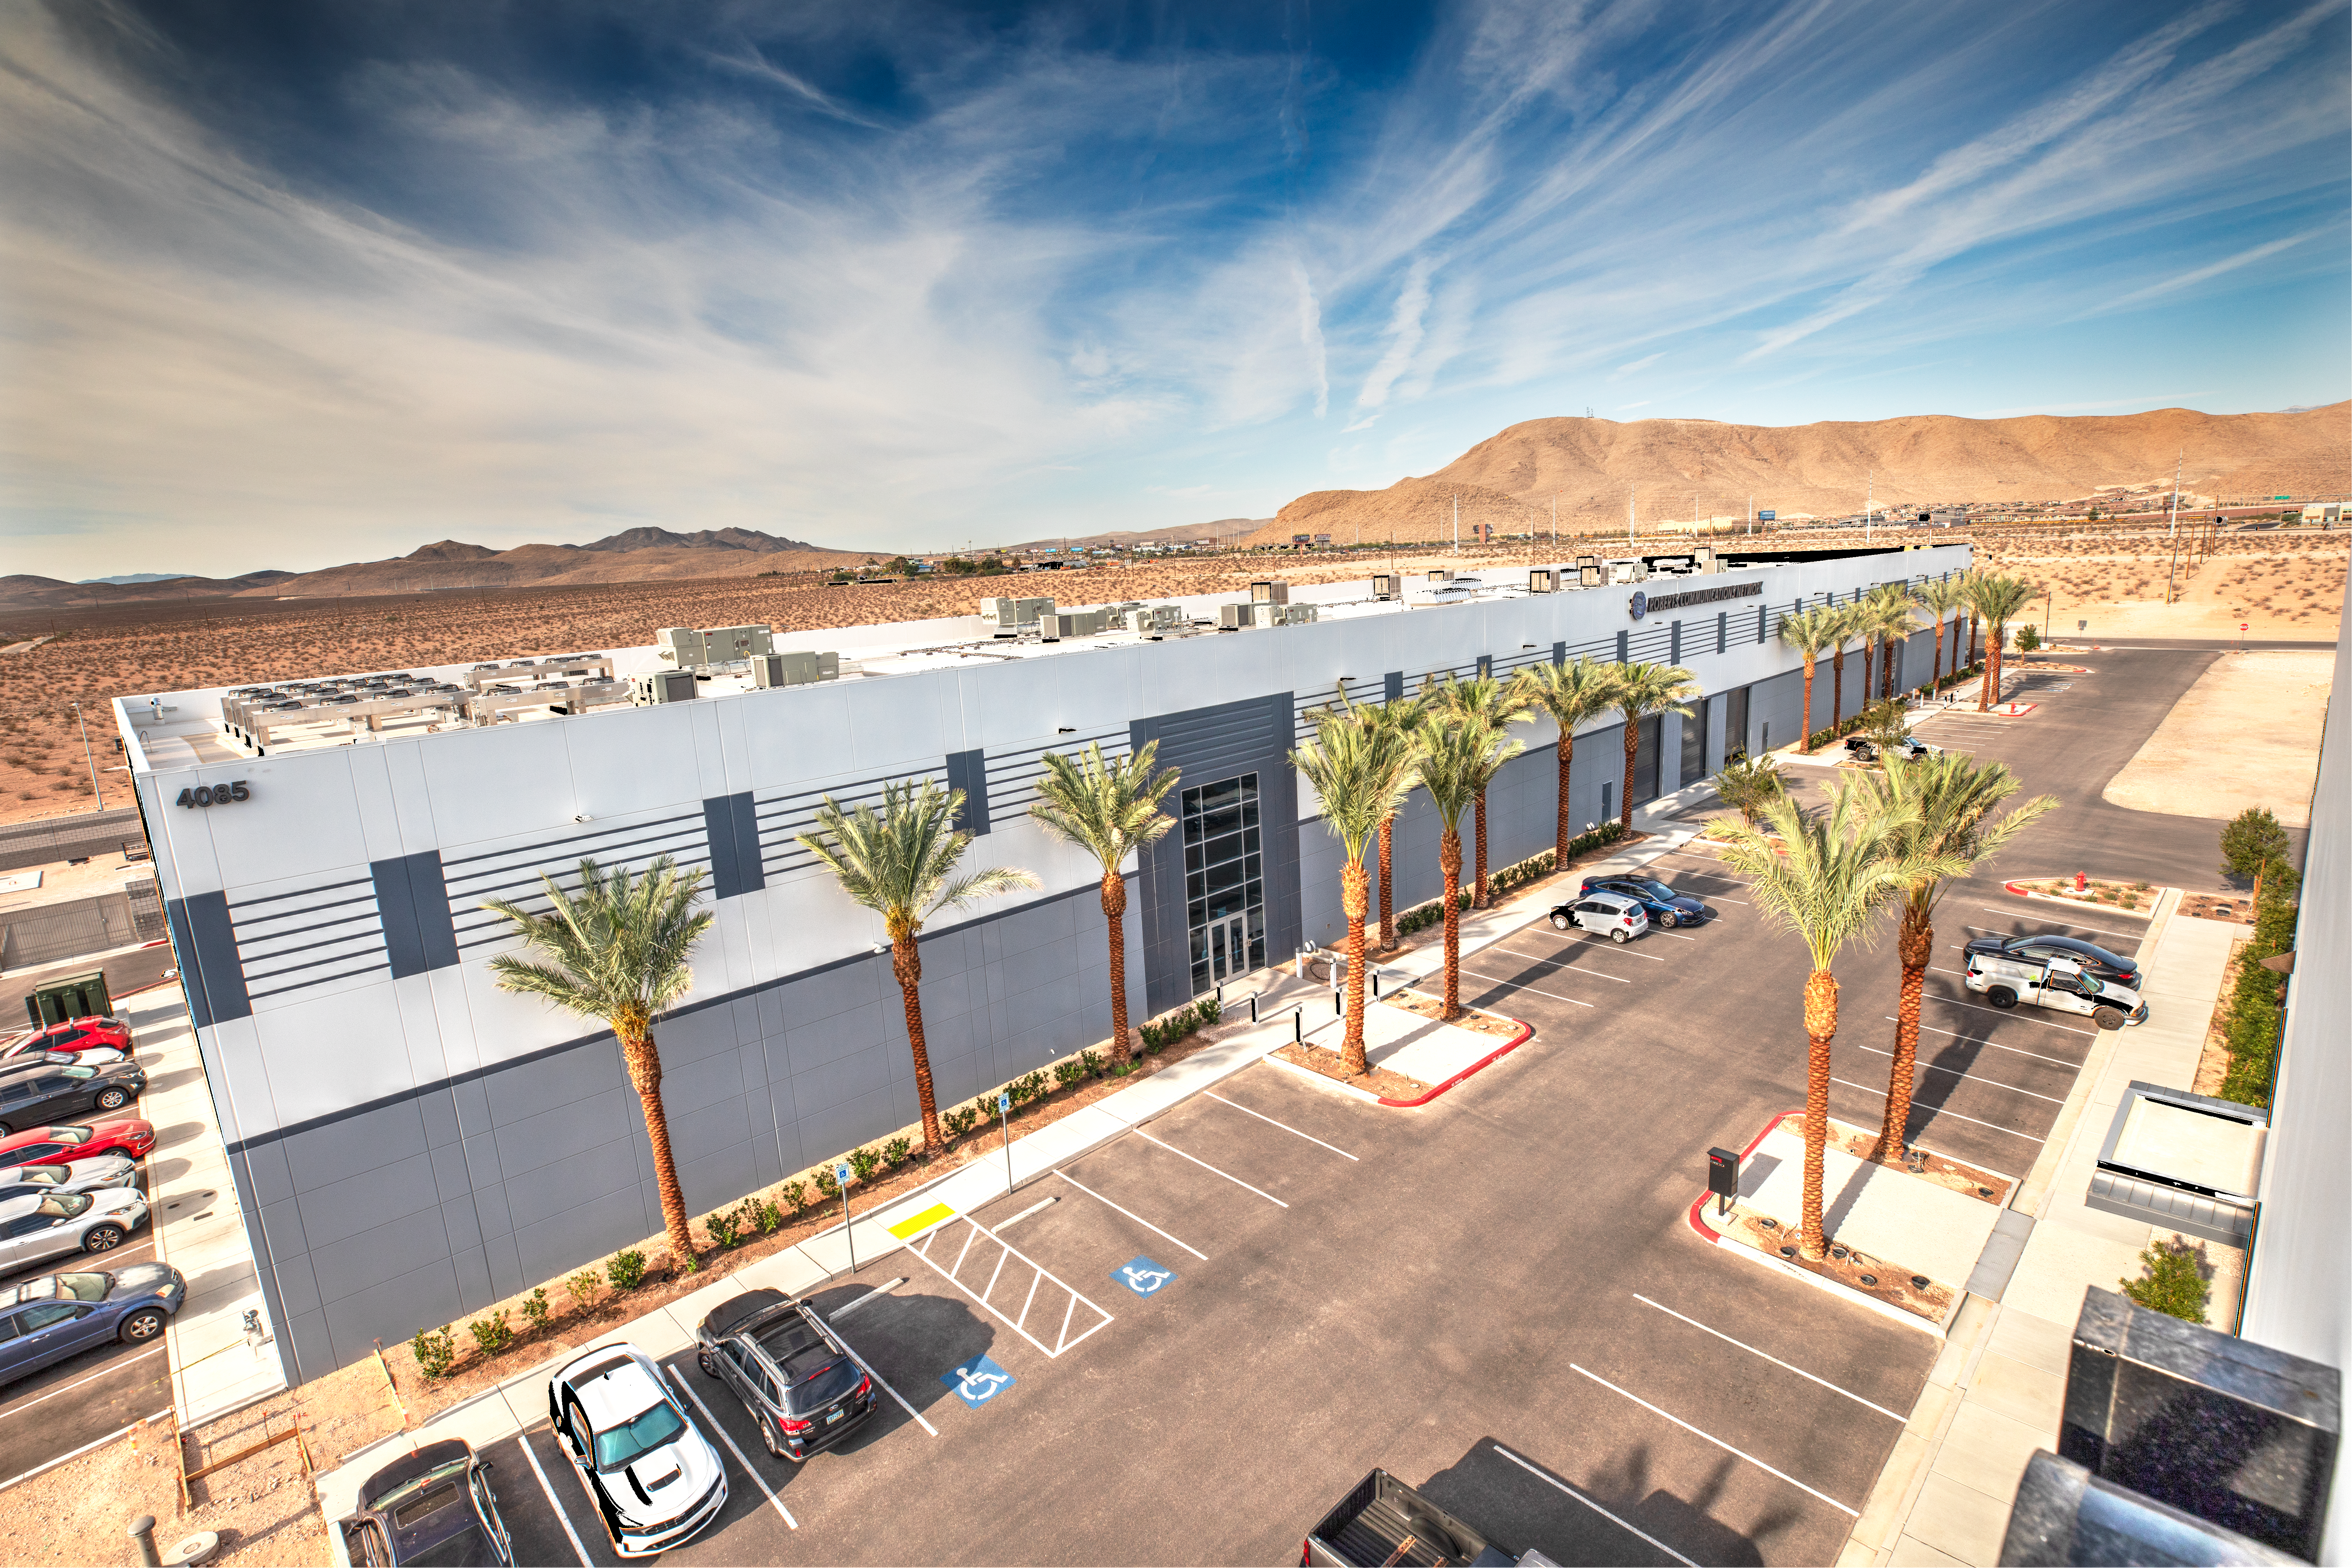 Roberts Communication NetworkLocated south of the M Resort Spa Casino, the Roberts Communications Network Campus consists of approximately 145,000 square feet of office, data center, network operations center, satellite communications and warehouse.